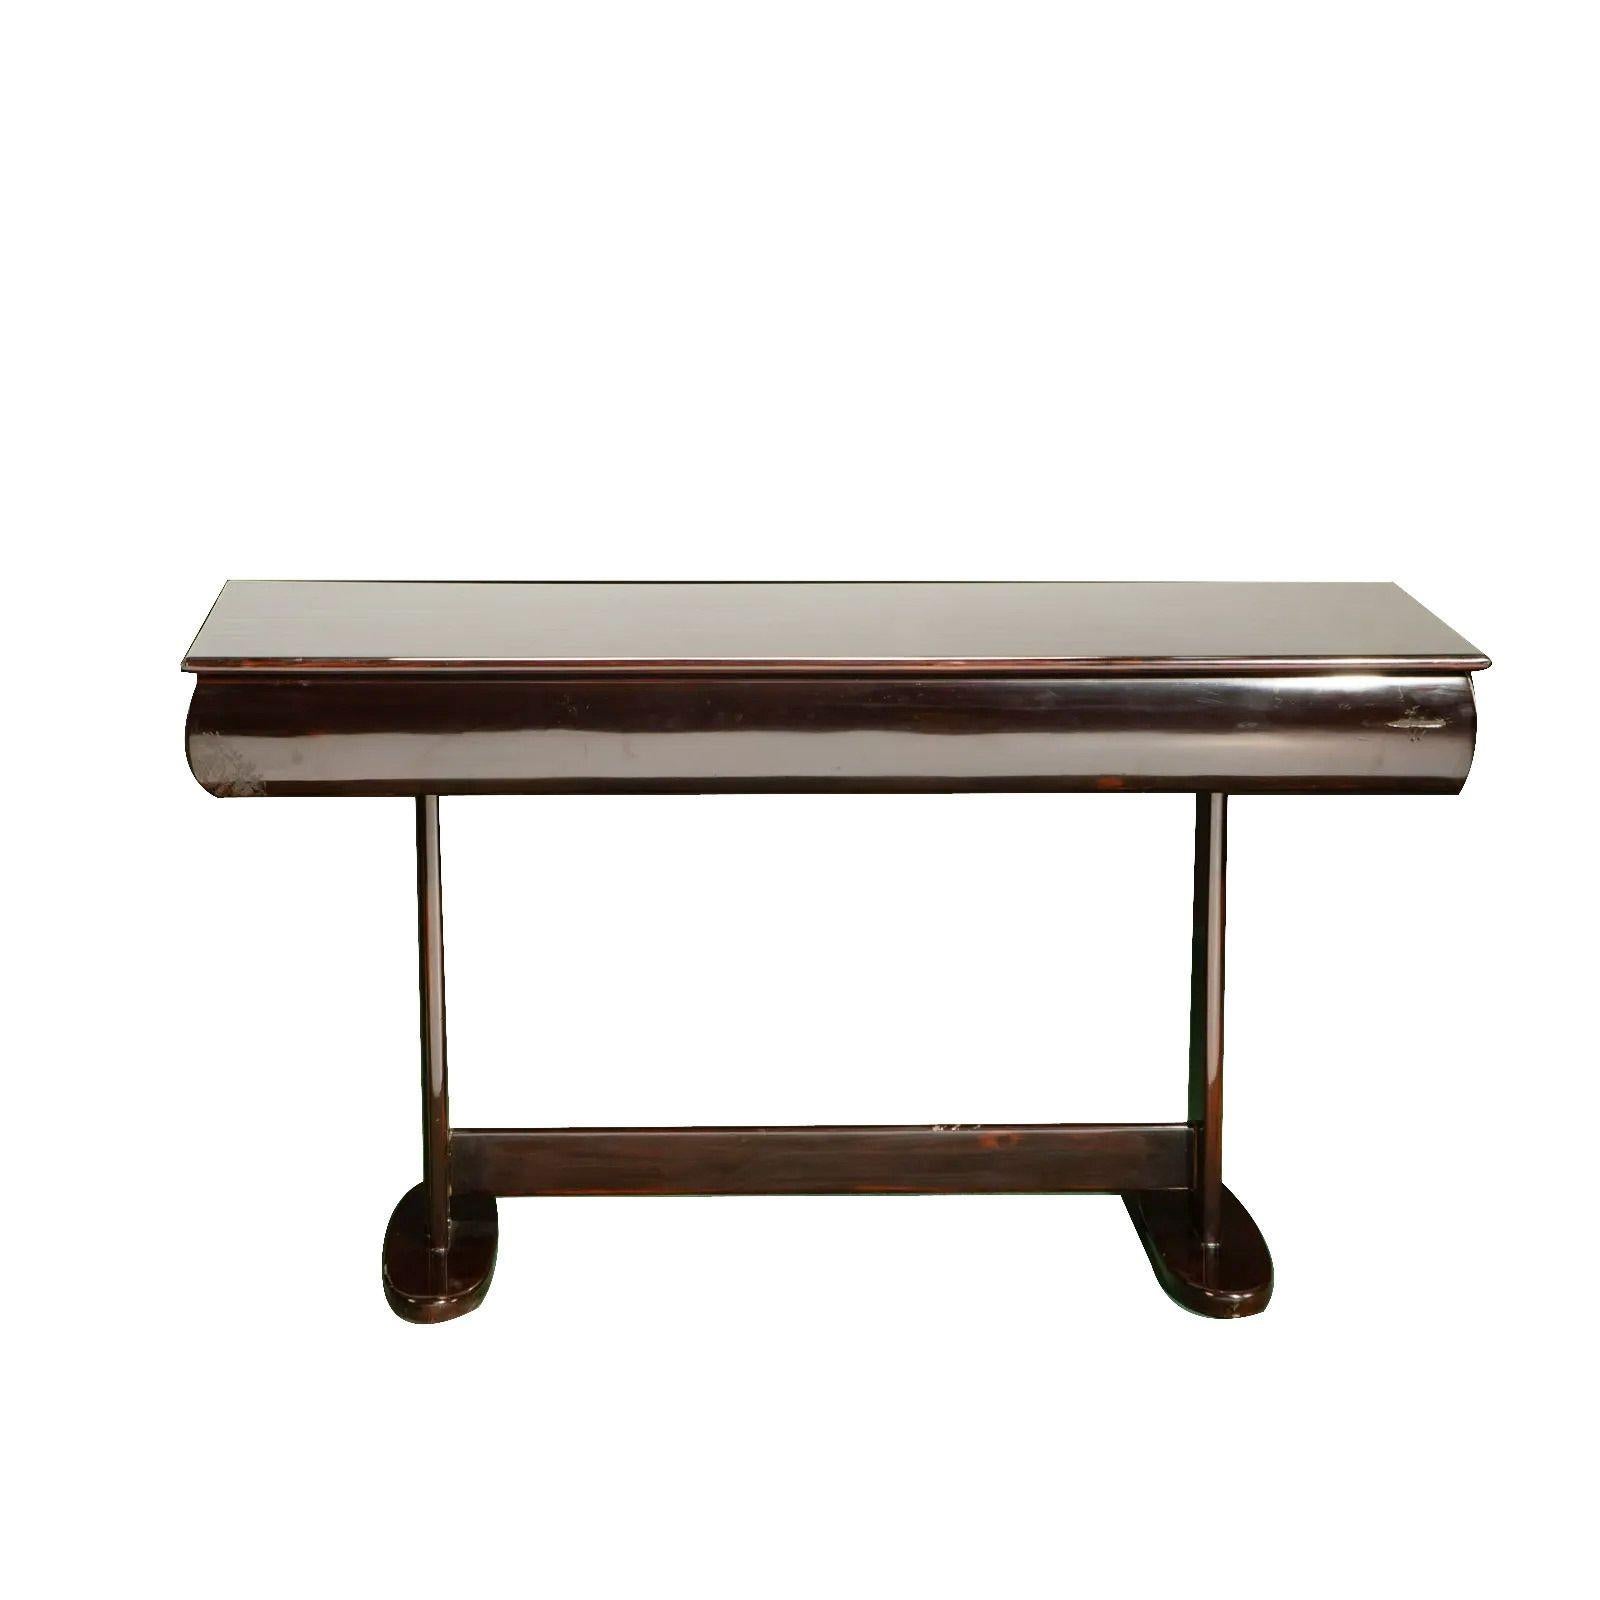 Art Deco Console Table, Circa 1930s in the style of Josef Hoffman

Streamline design with high-gloss finish and three drawers with chrome hardware
 
Dimensions

32